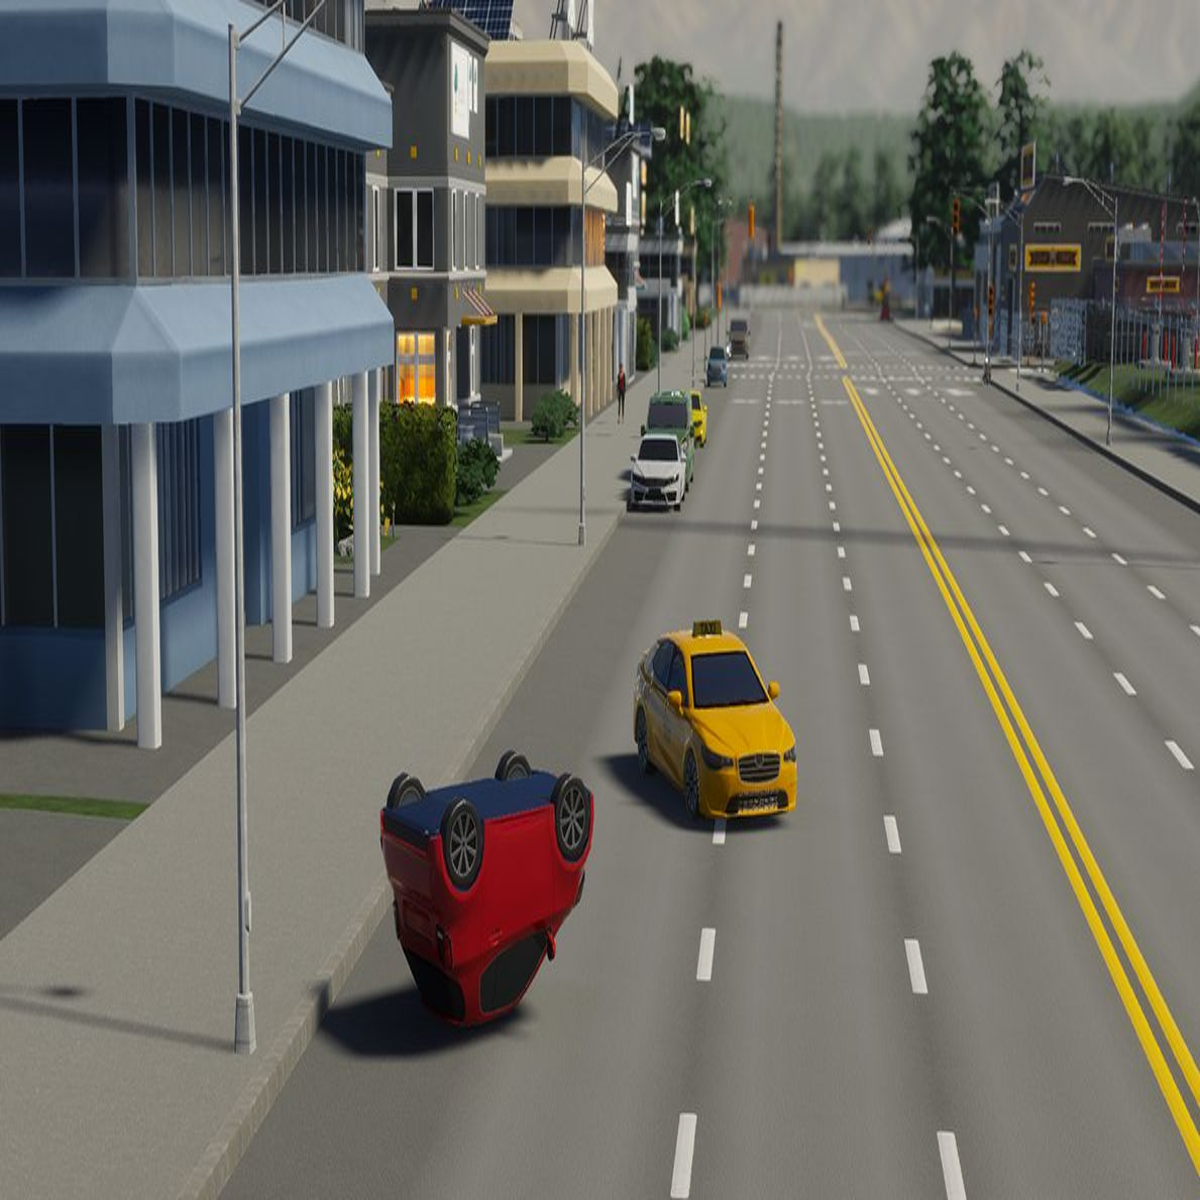 This Solves Cities: Skylines II Performance Problems